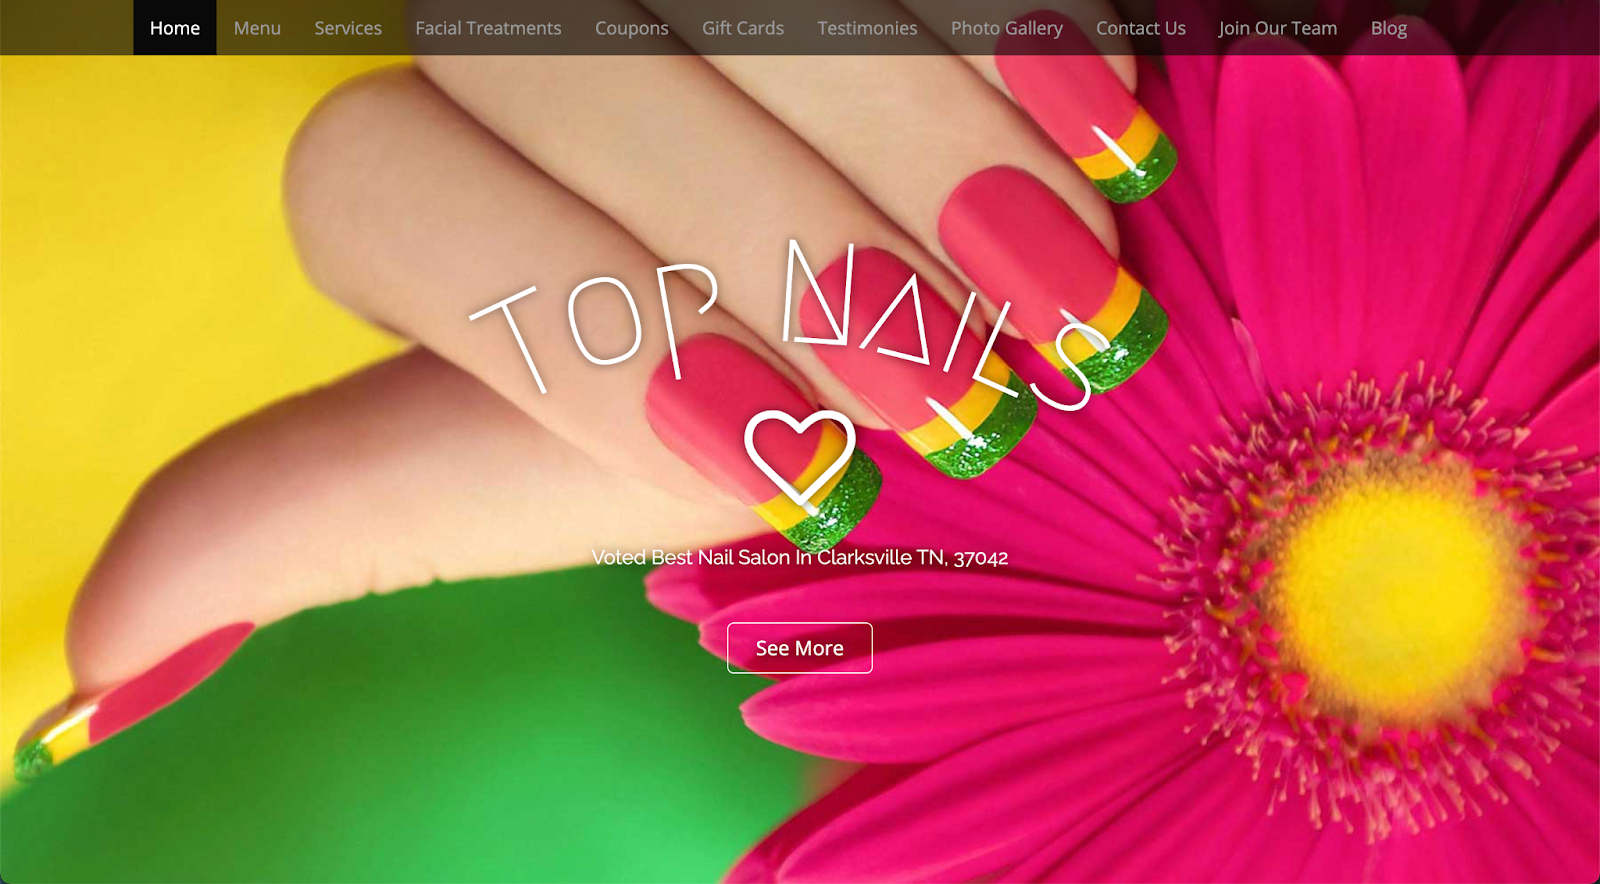 Best nail salon websites, example from Top Nails.